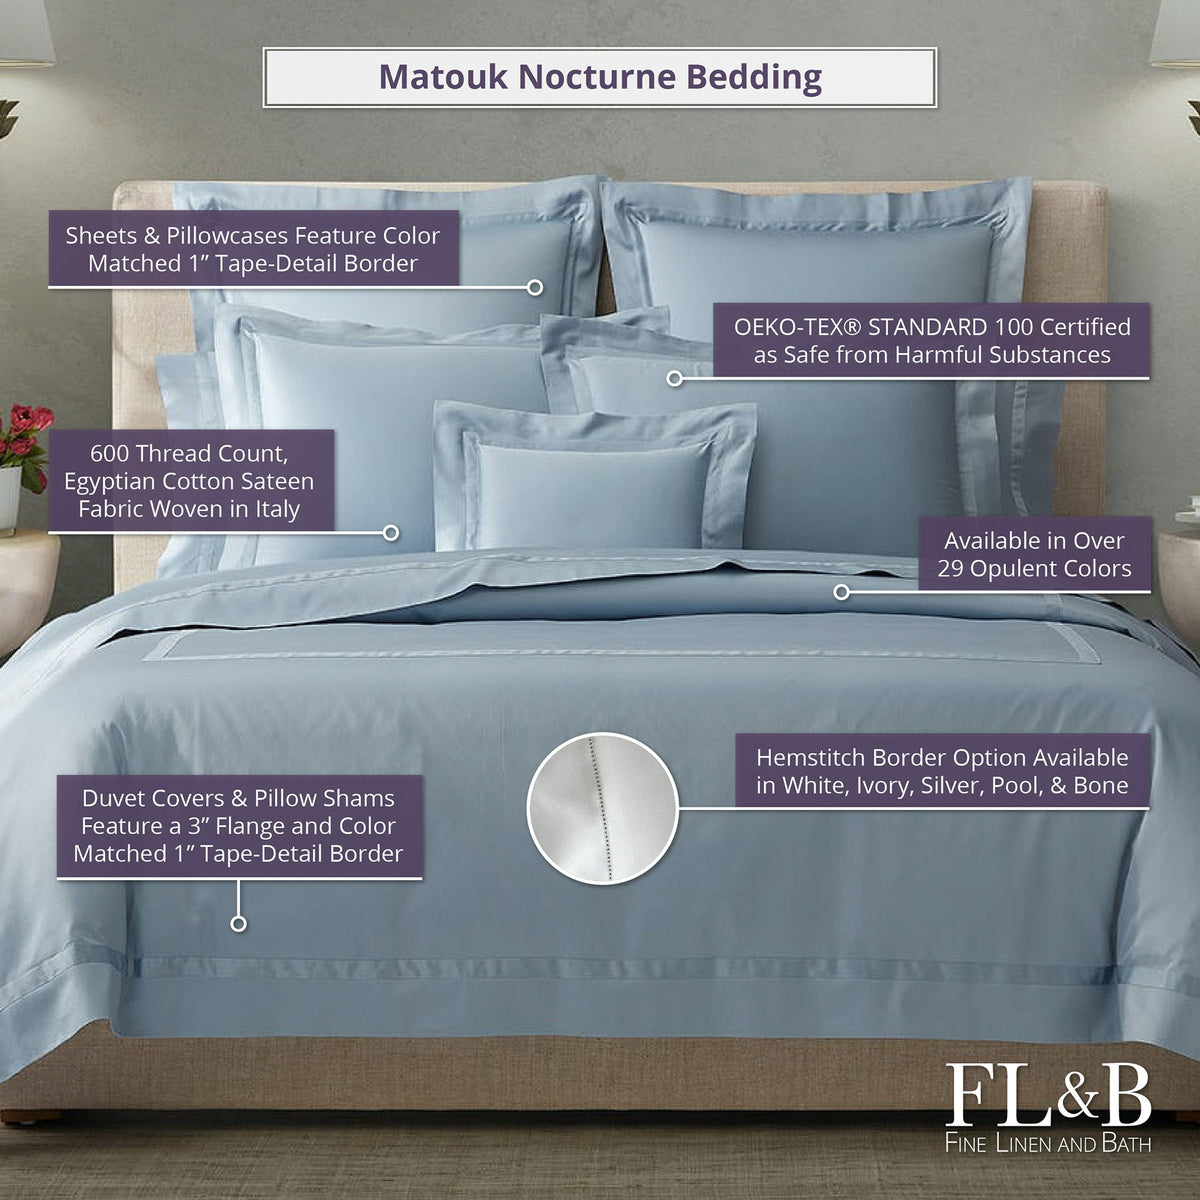 Matouk Bel Tempo Nocturne Bedding on Bed in Bedroom with Descriptive Labels